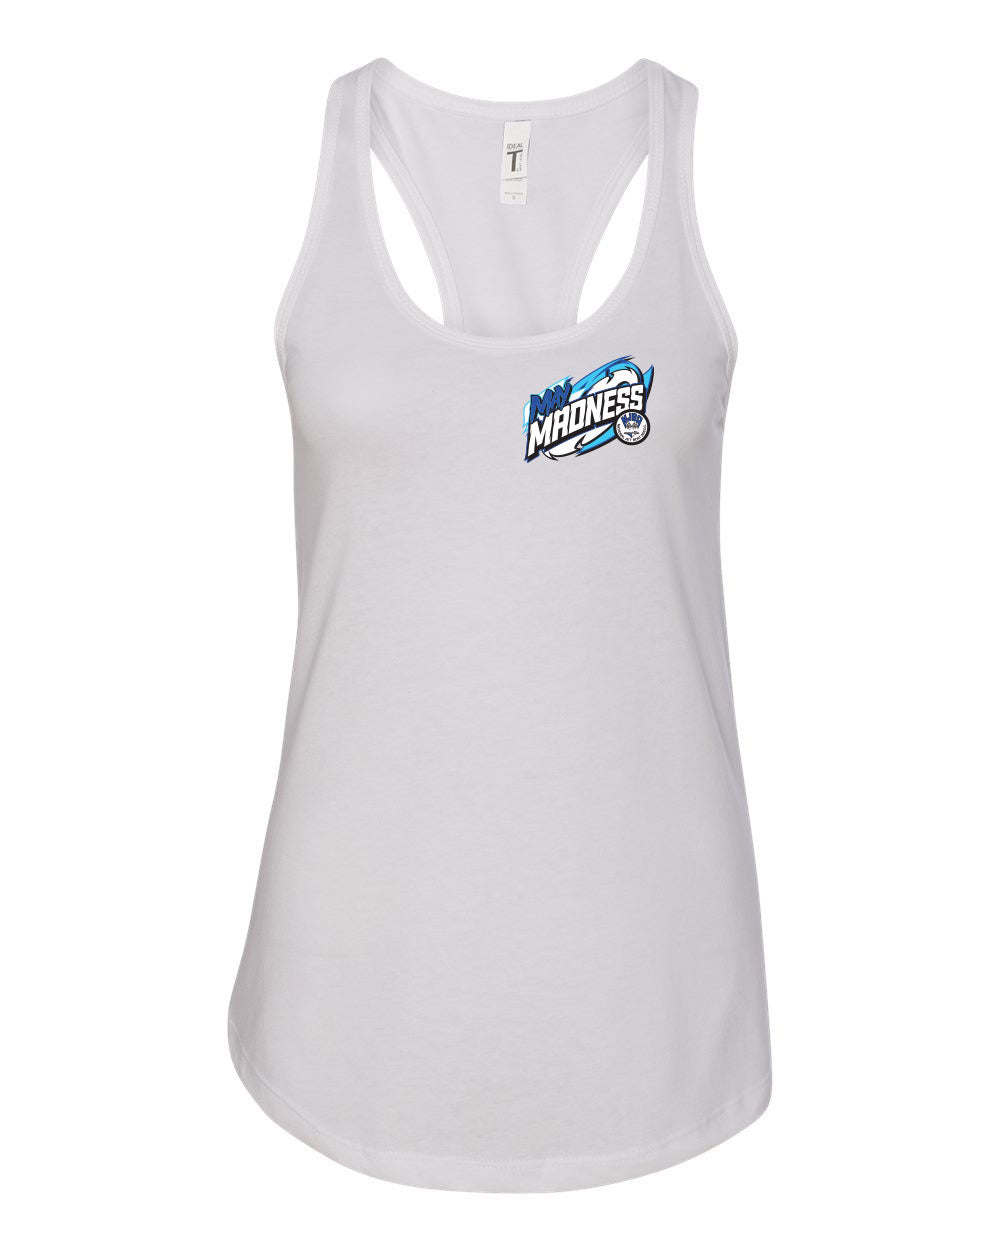 NJBA May Madness 2022 Event Womens Tank Top